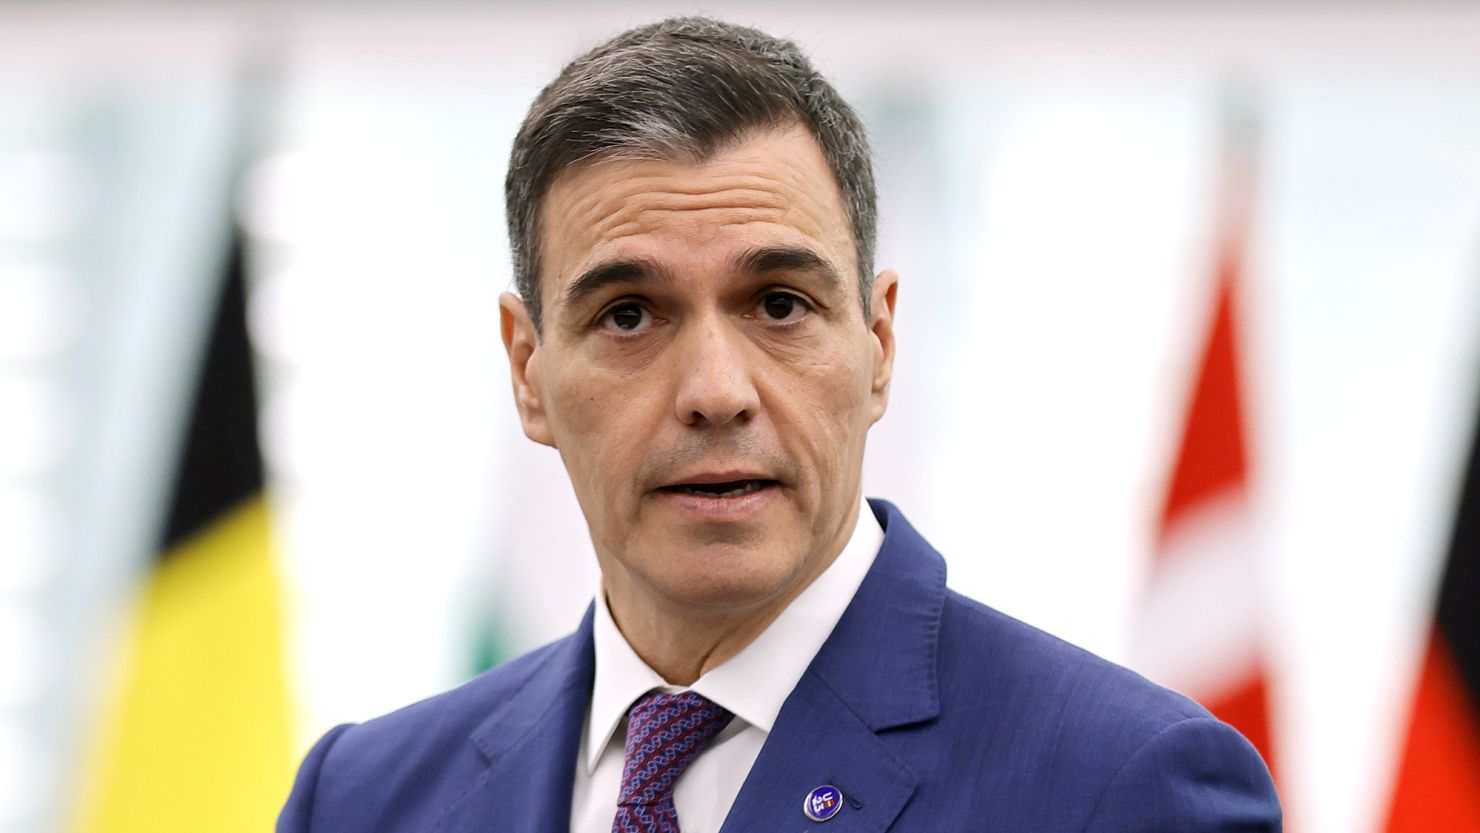 Pedro Sanchez entered office in 2018 after winning a no-confidence vote against the conservative Mariano Rajoy.